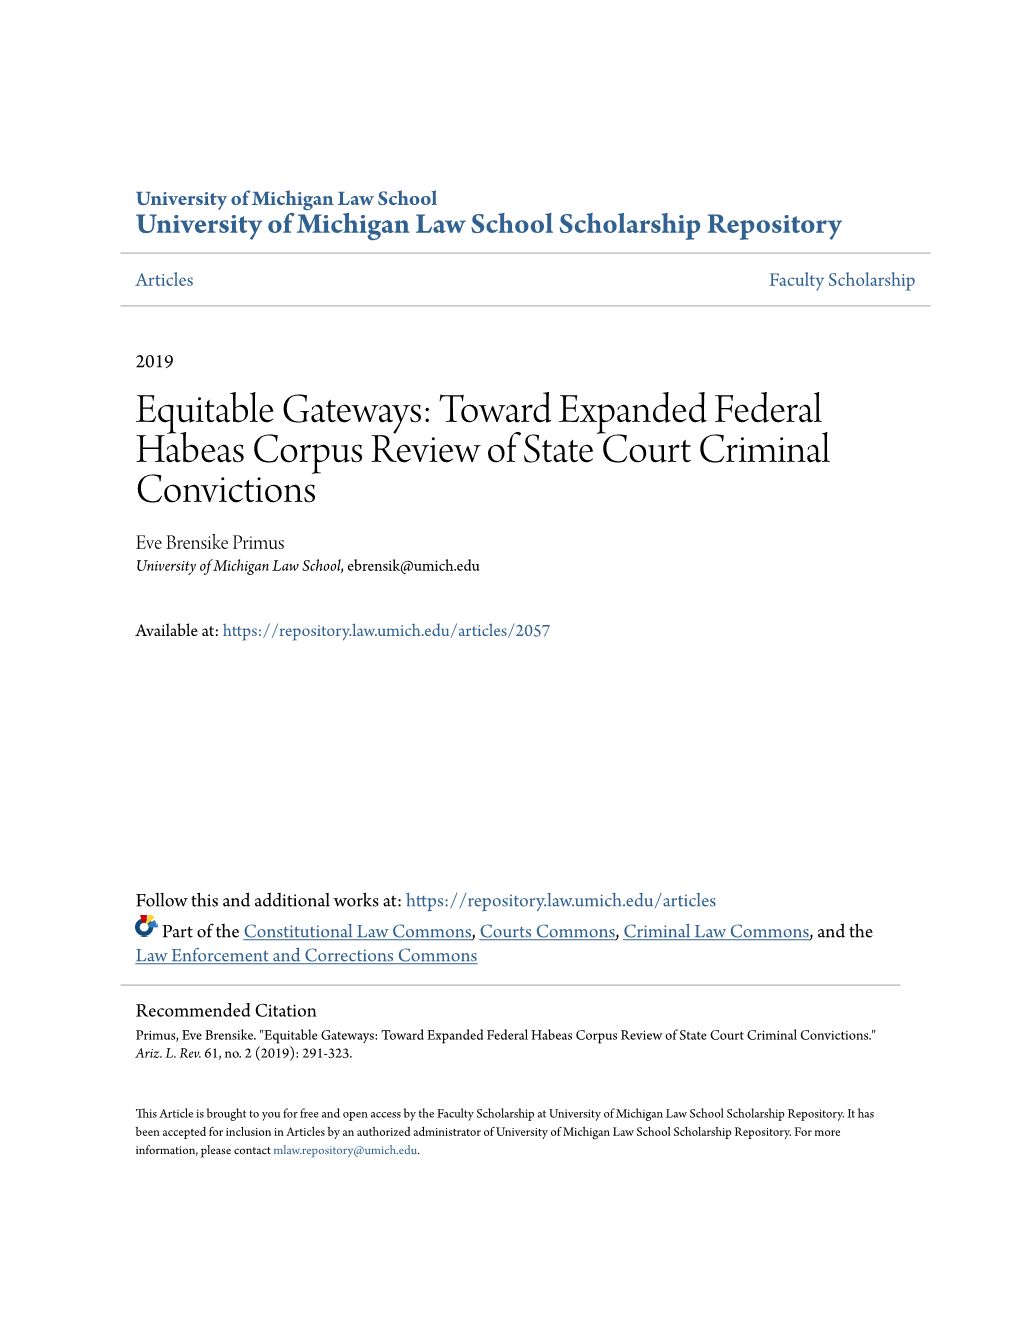 Toward Expanded Federal Habeas Corpus Review of State Court Criminal Convictions Eve Brensike Primus University of Michigan Law School, Ebrensik@Umich.Edu